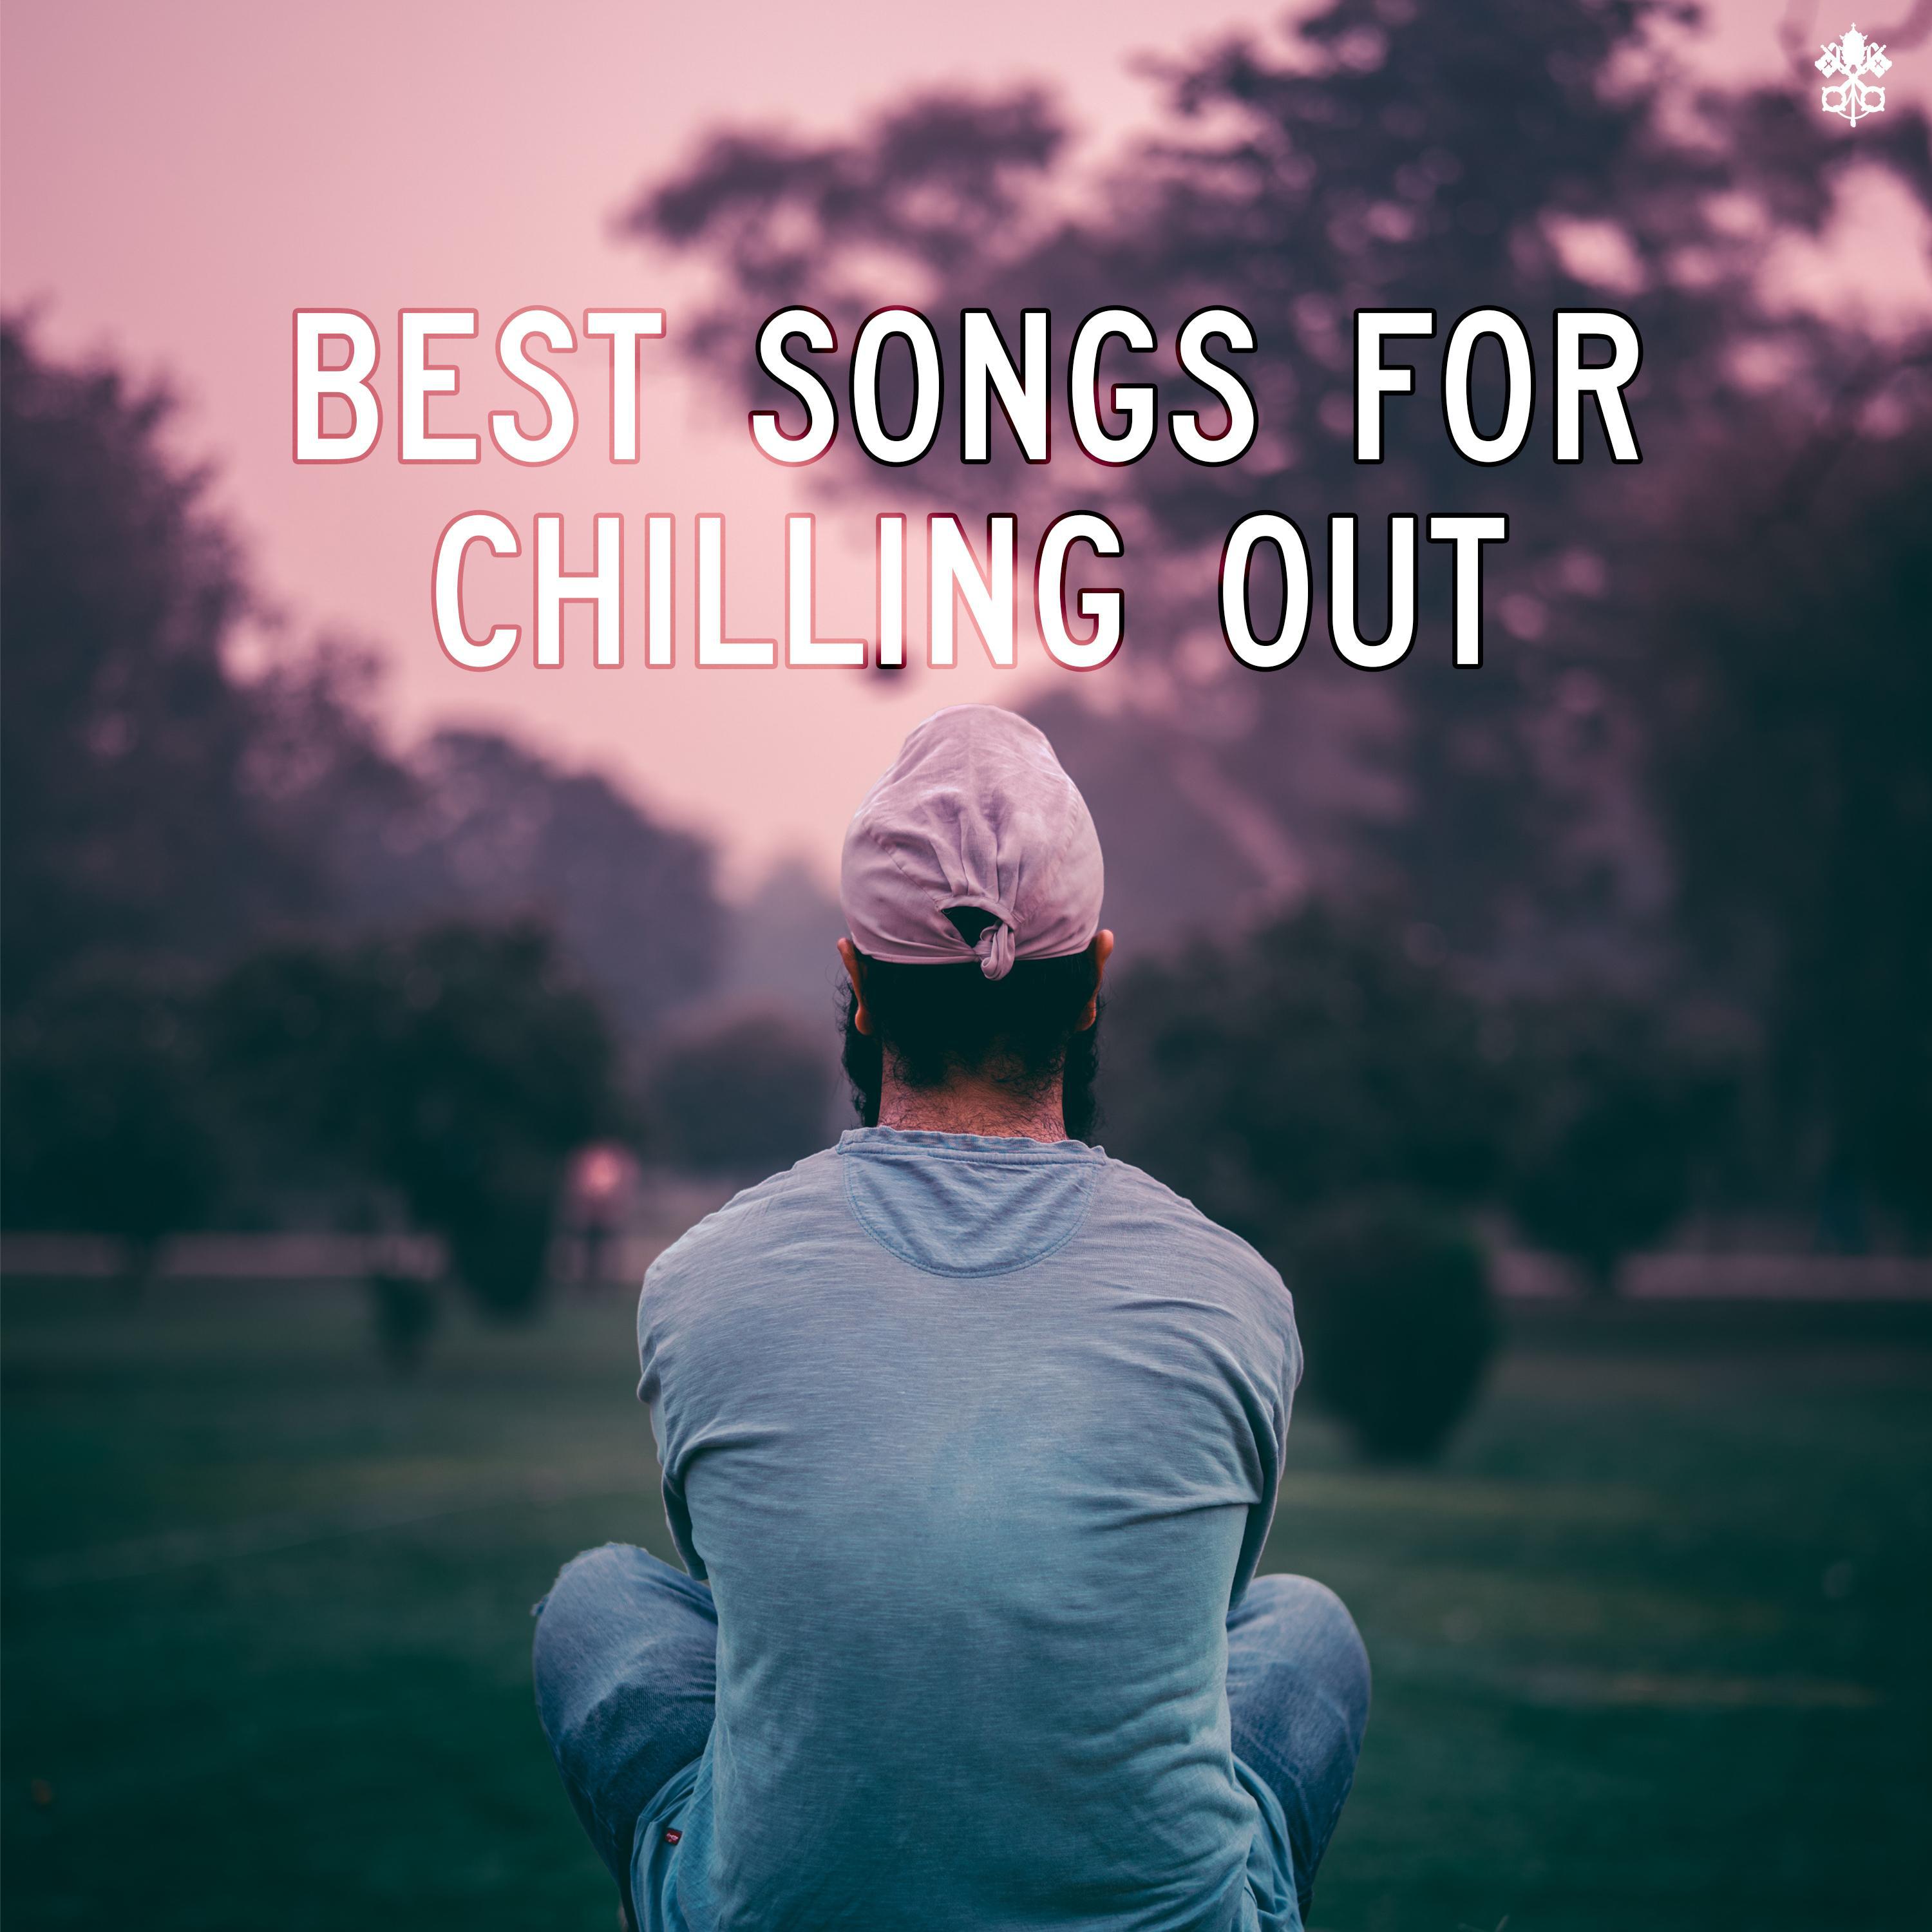 Best Songs for Chilling Out